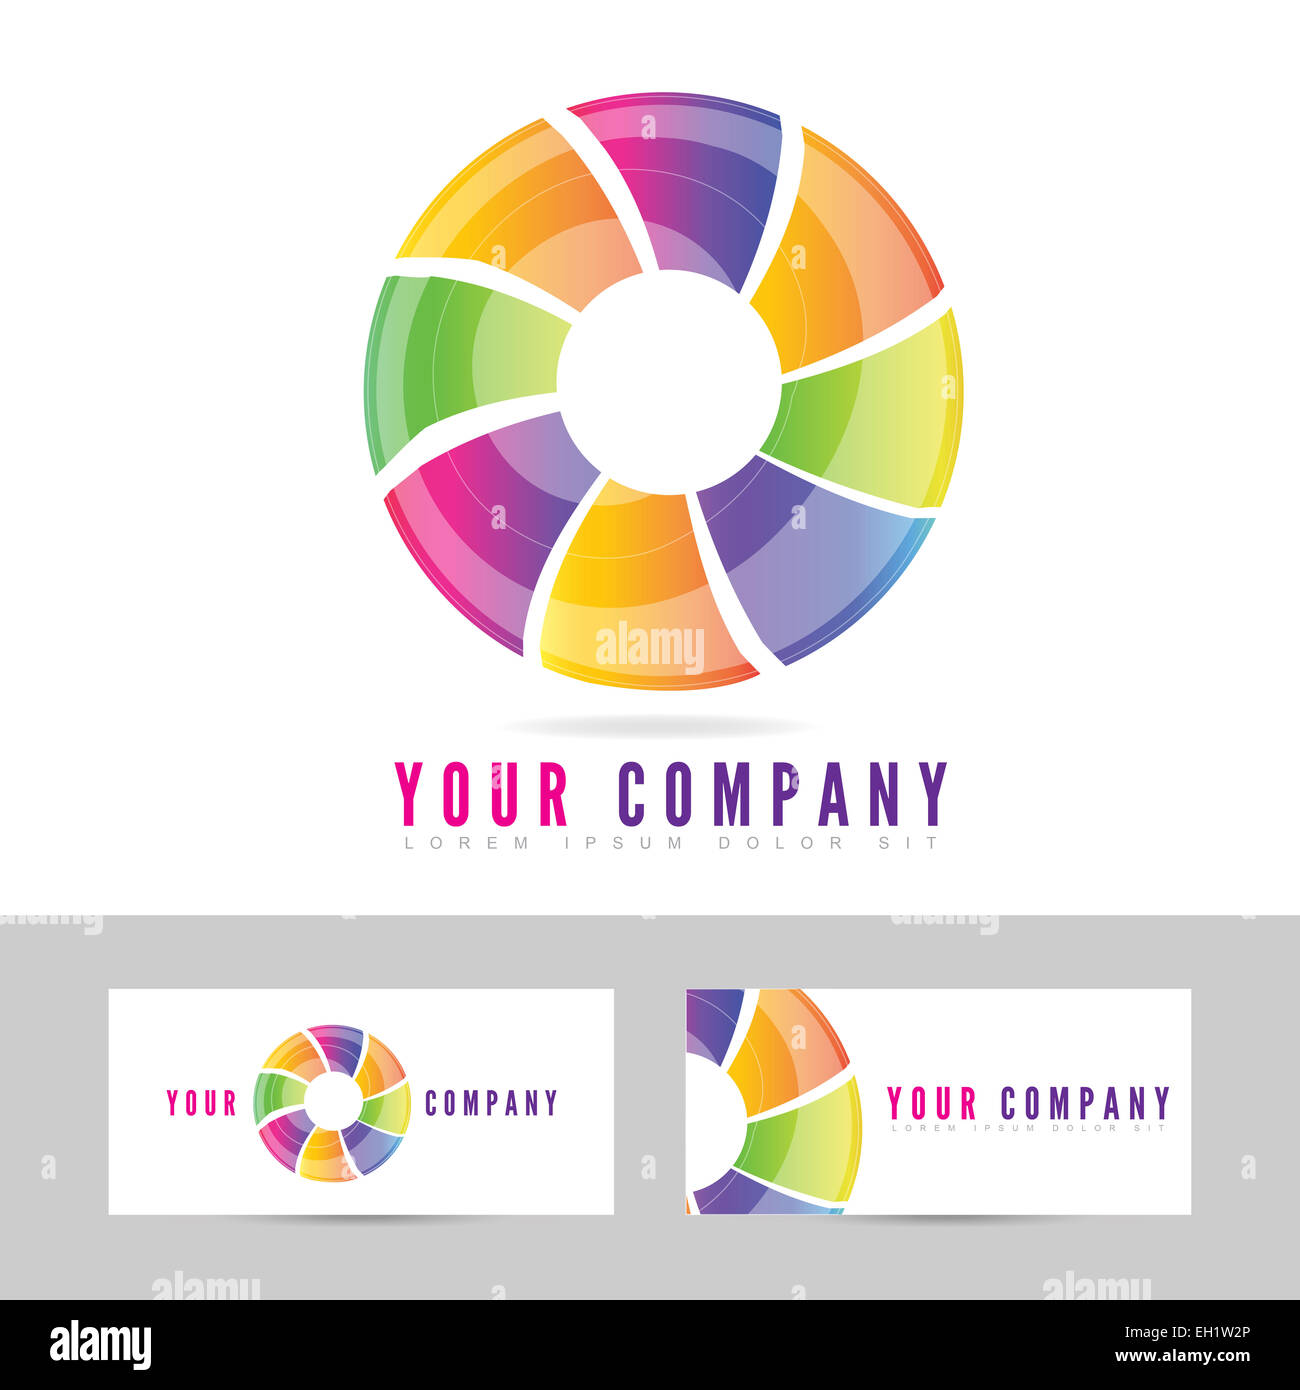 Colored business logo icon vector with business card template Stock Photo